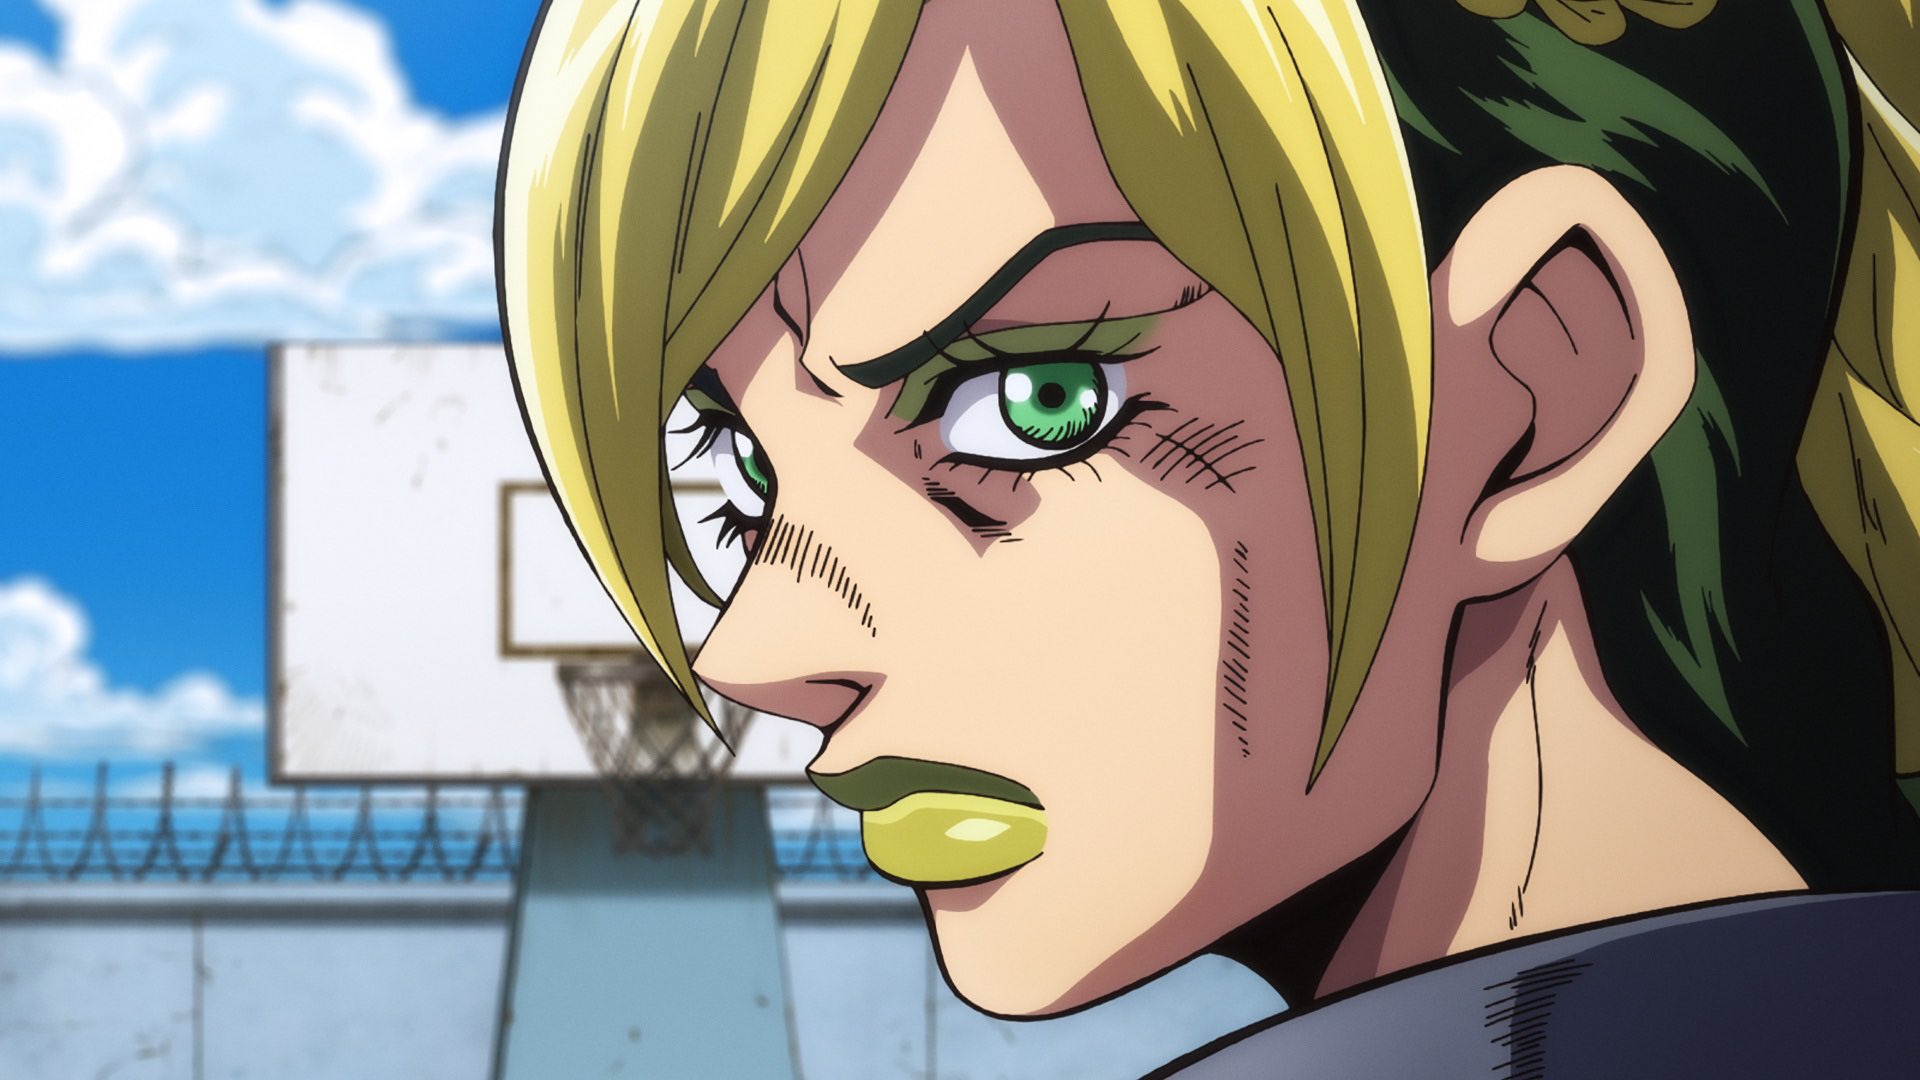 What is the ending song to the Stone Ocean anime and who performs it